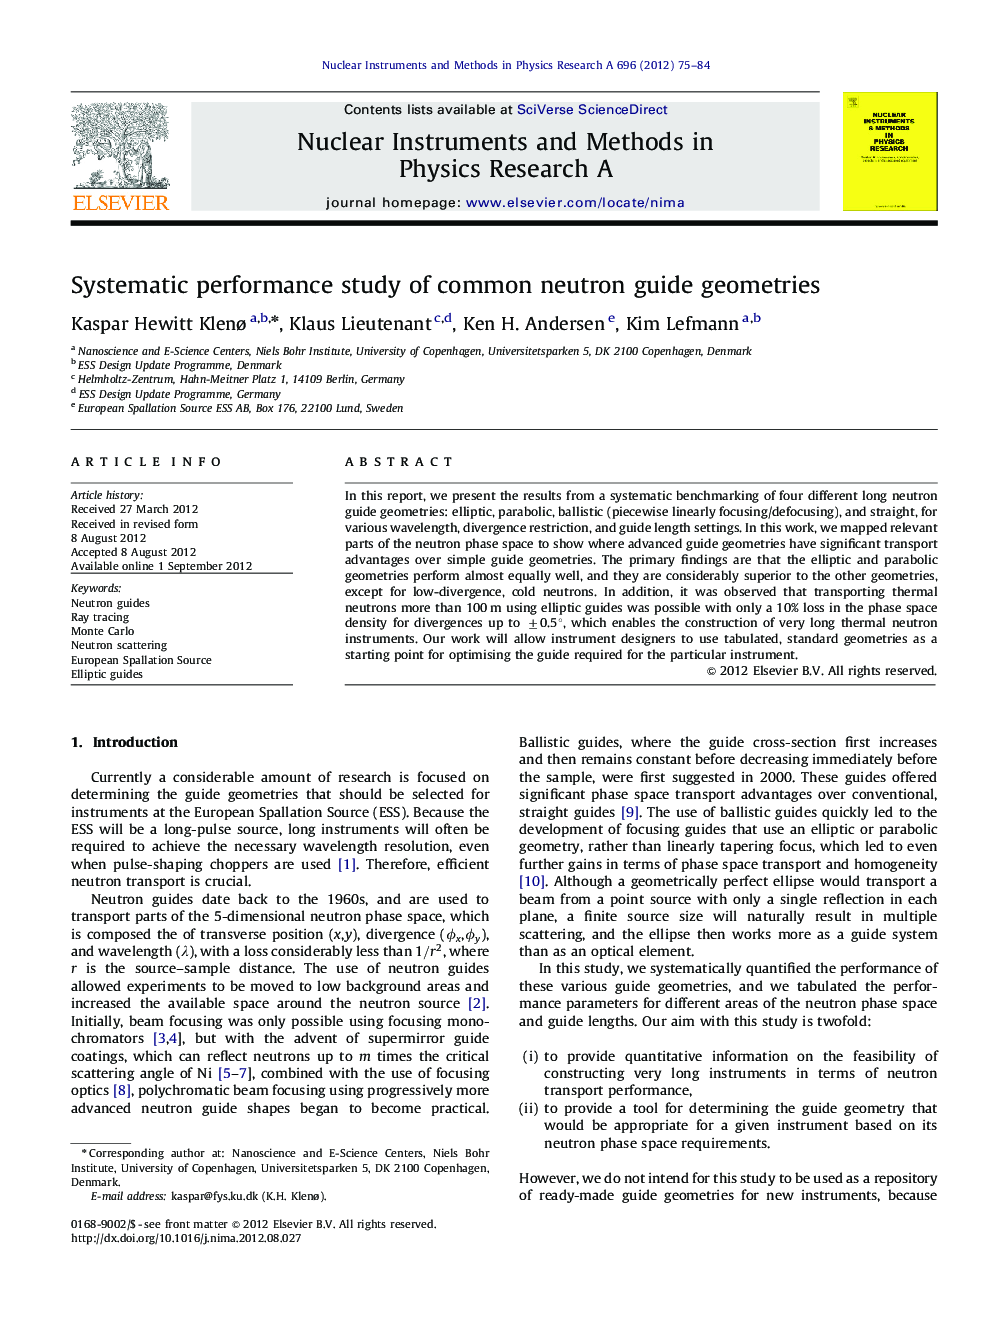 Systematic performance study of common neutron guide geometries